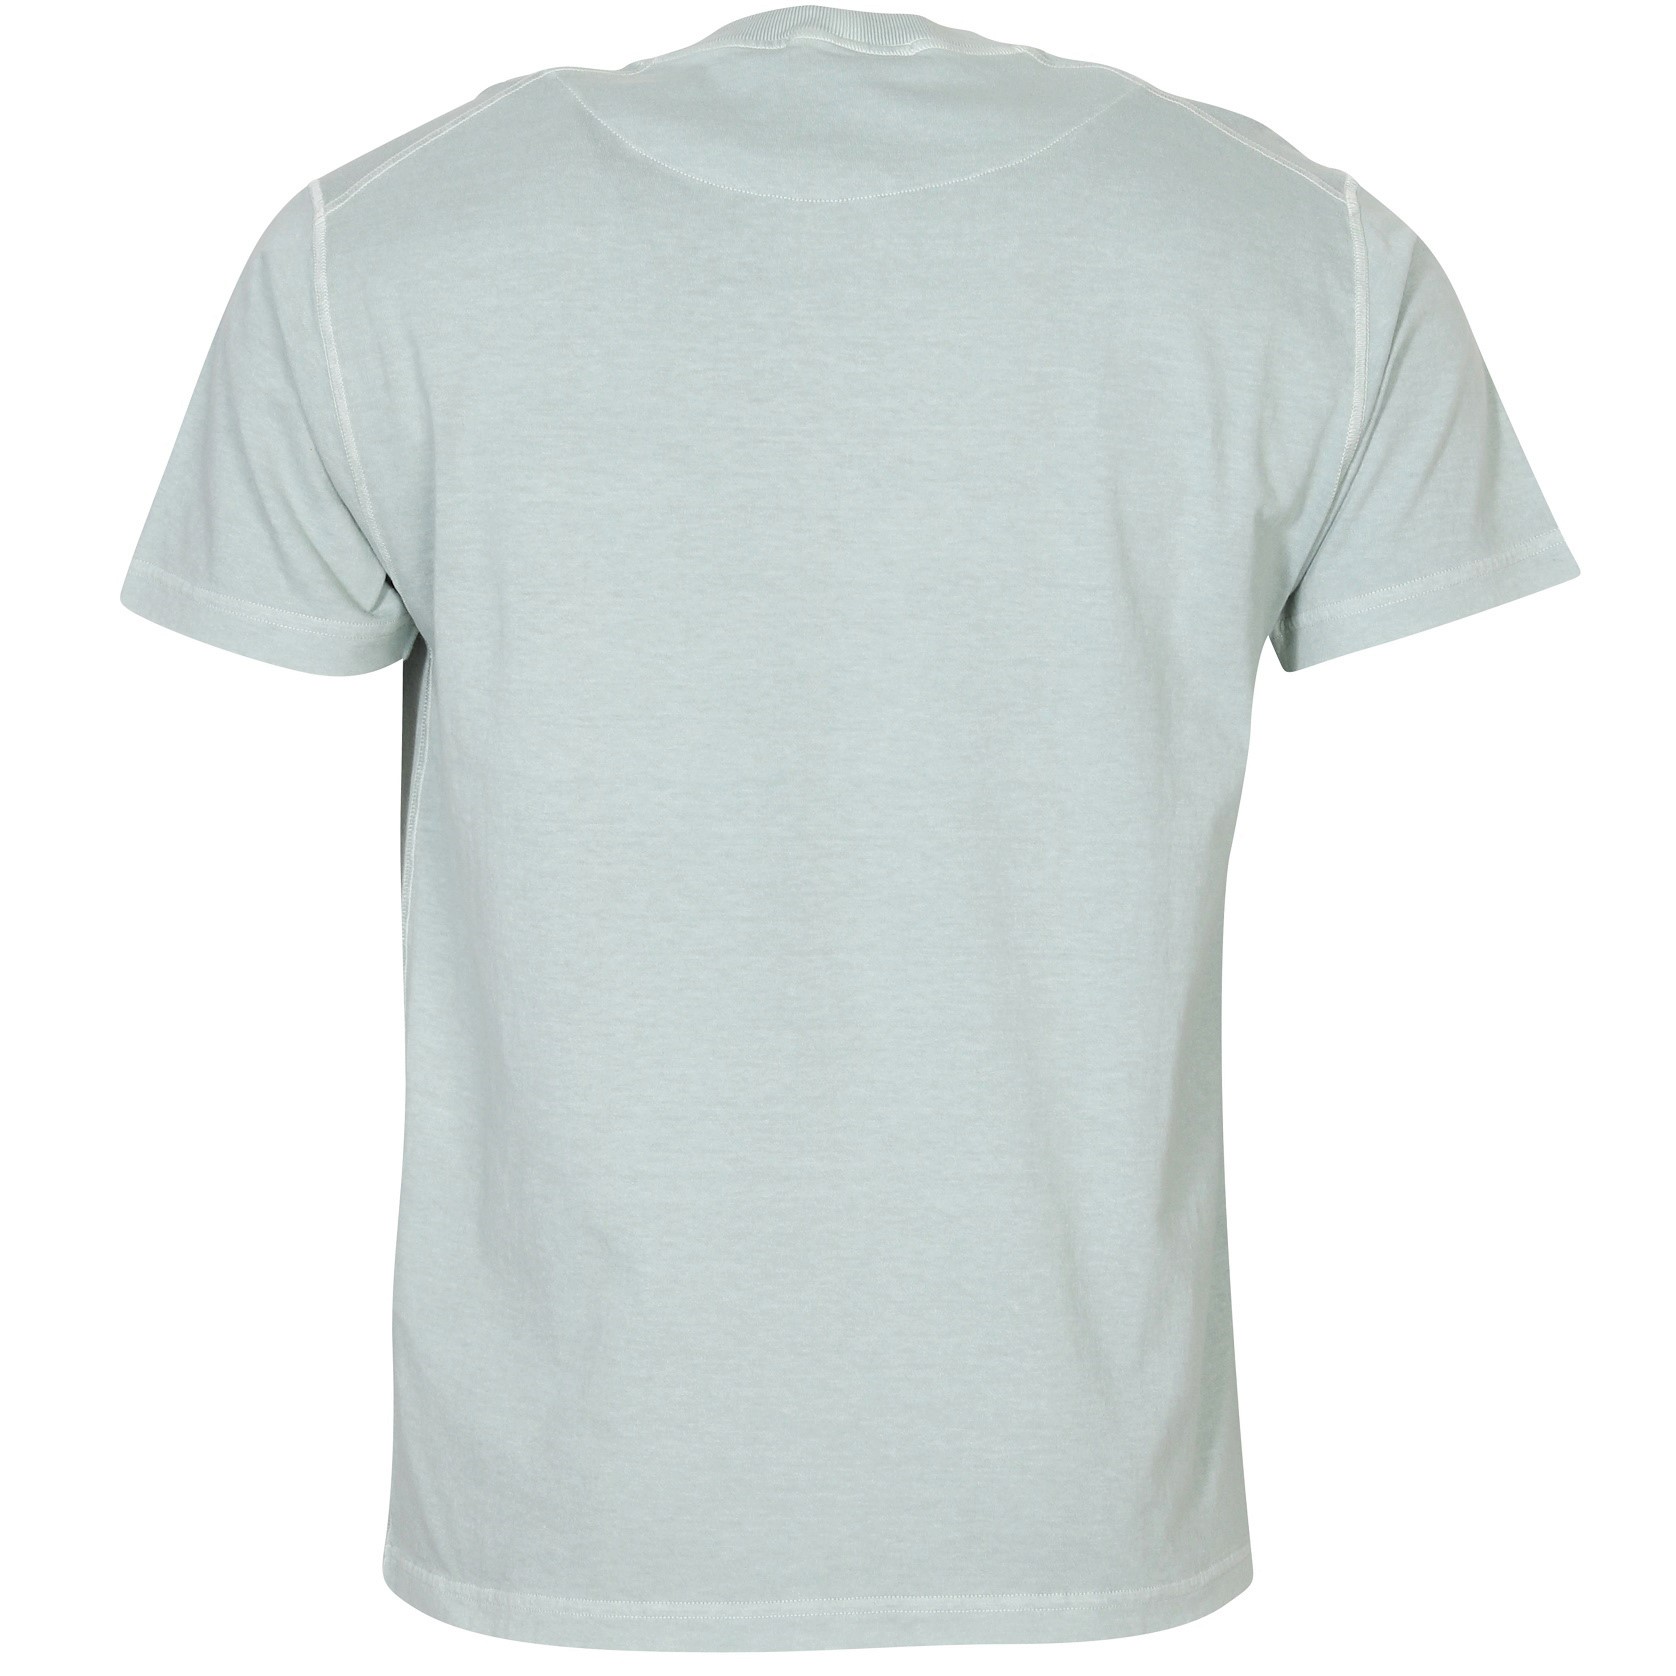 STONE ISLAND Pocket T-Shirt in Washed Sky Blue M